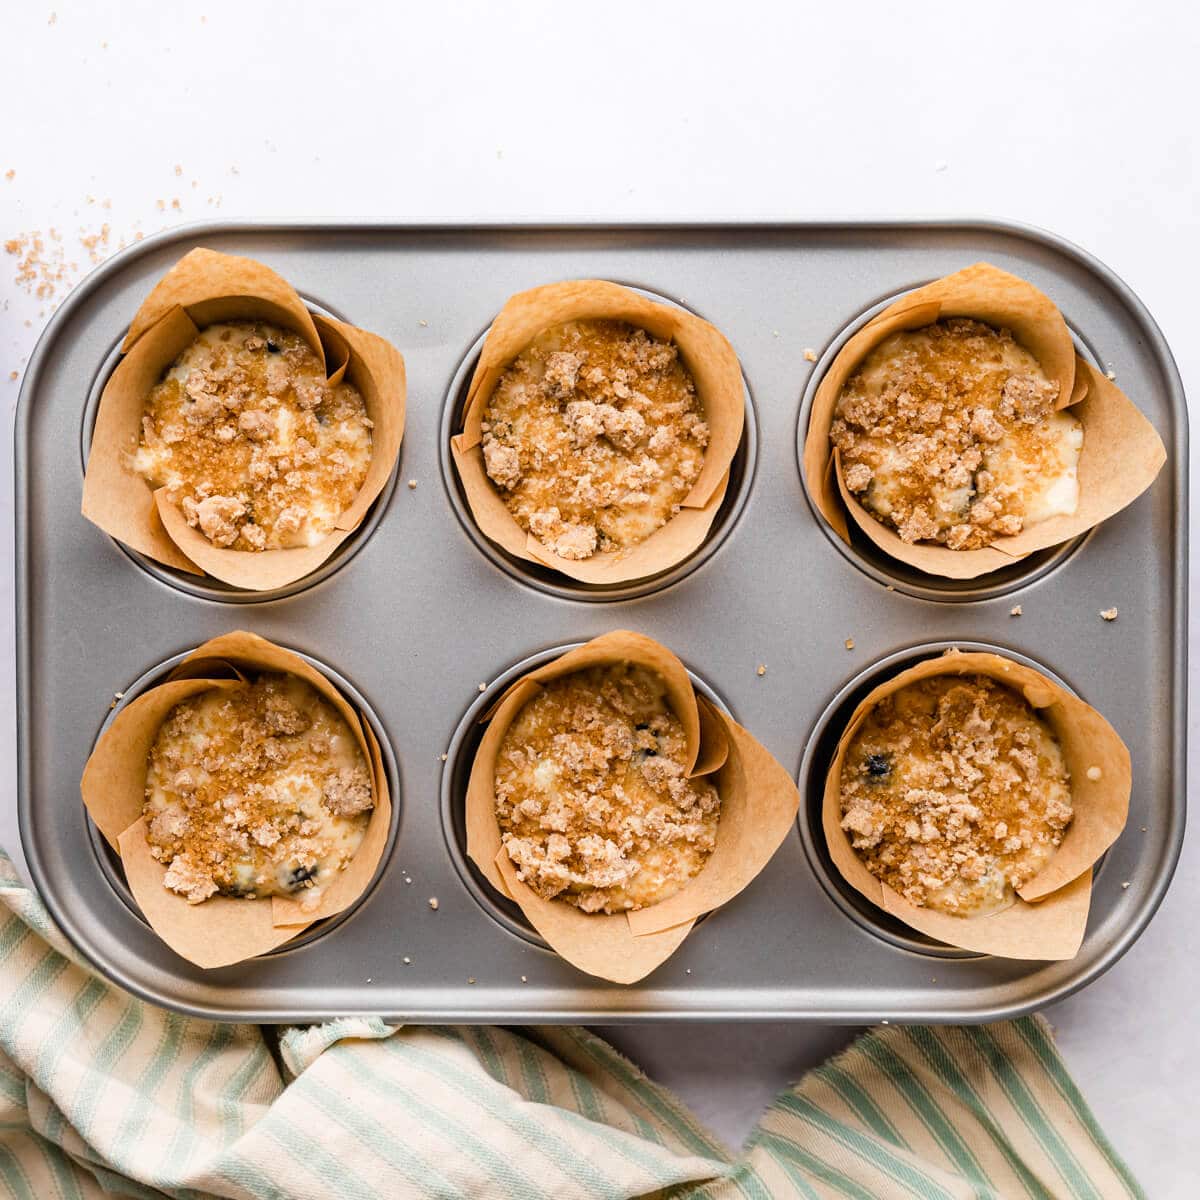 muffin batter topped with streusel inside of the muffin cases in the baking tin.